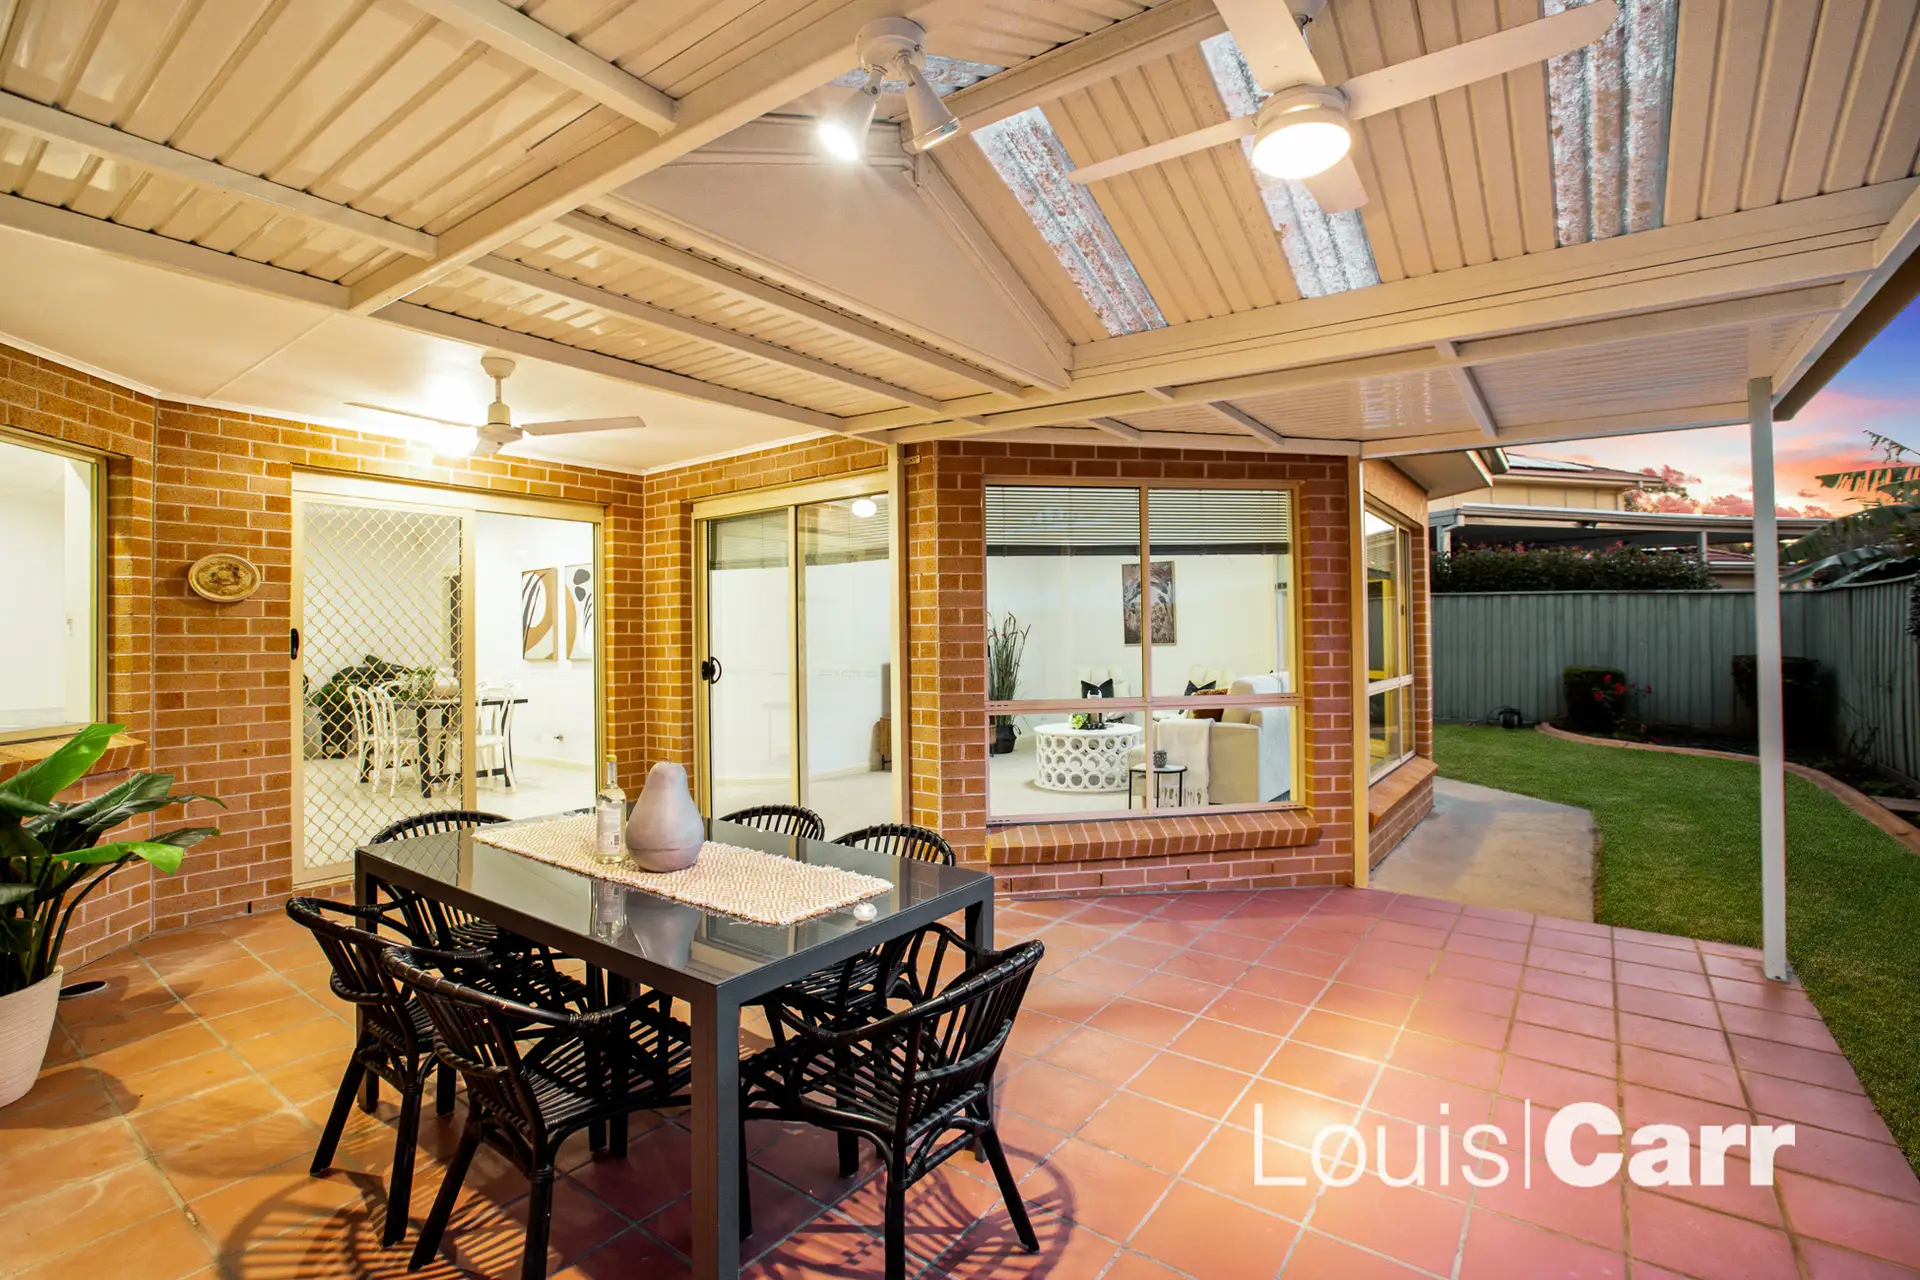 Photo #9: 68 Chepstow Drive, Castle Hill - Sold by Louis Carr Real Estate